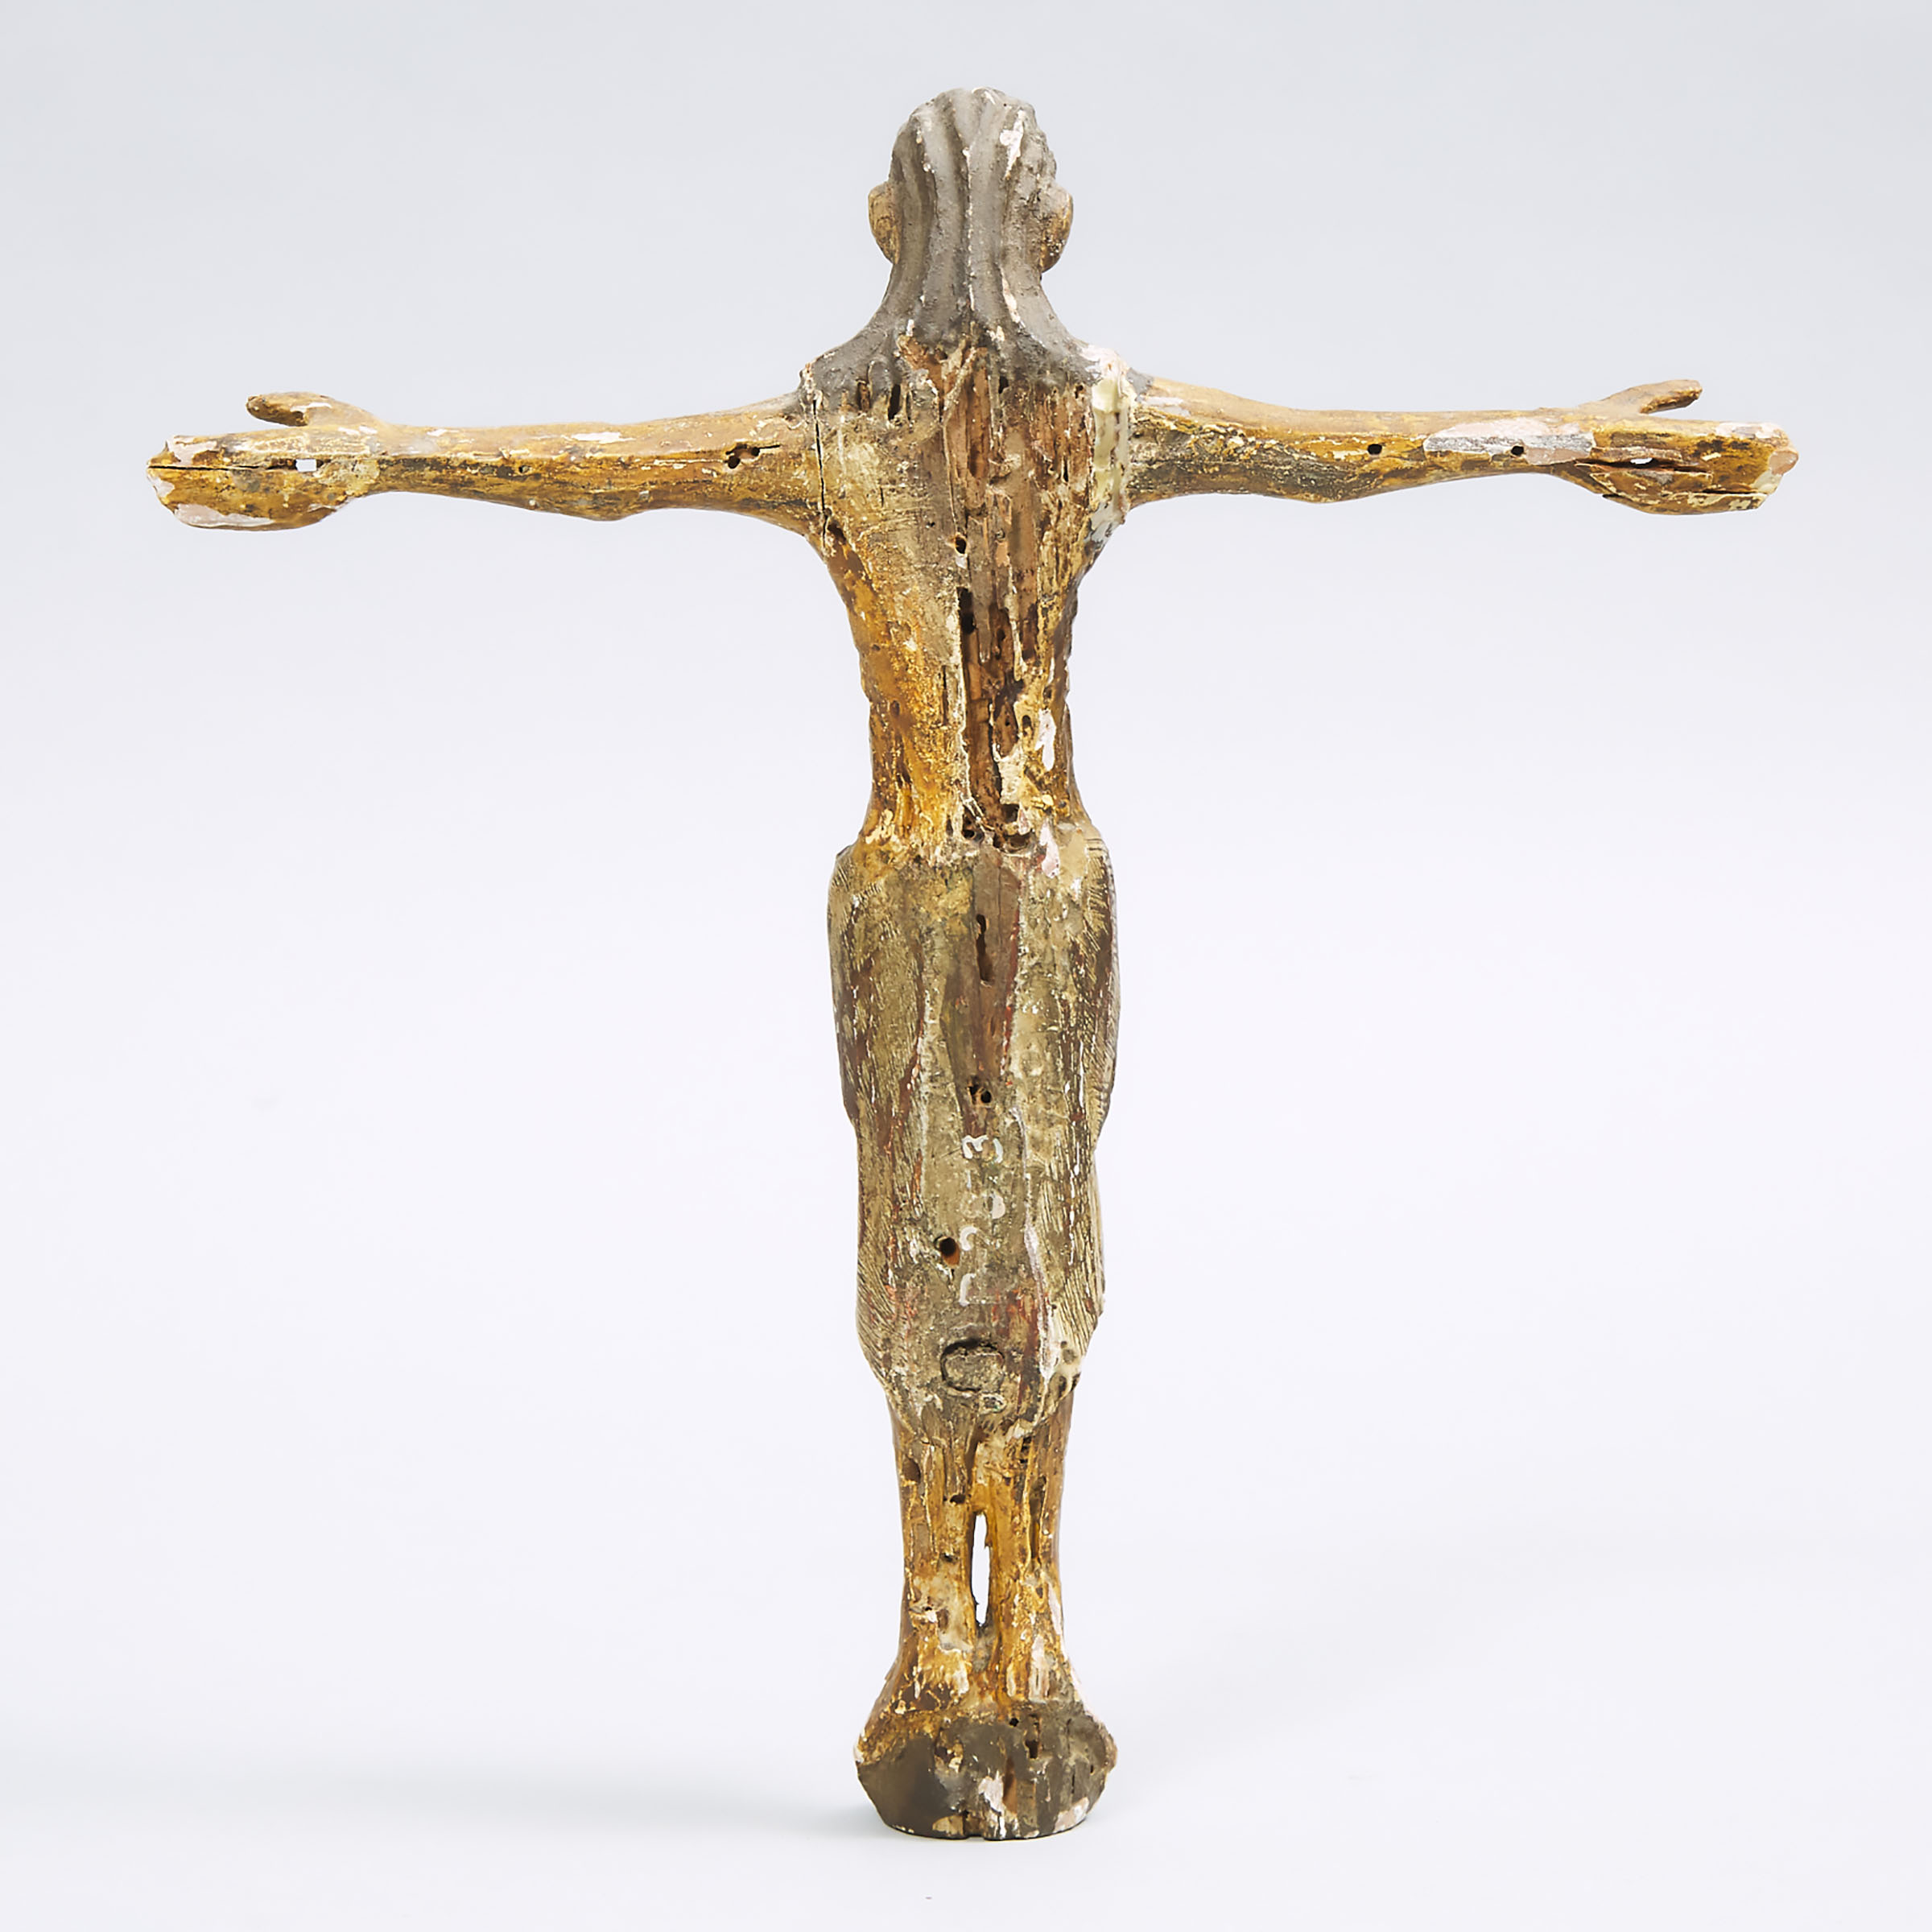 Continental Late Gothic Provincial Carved and Polychromed Corpus Christi, 16th century